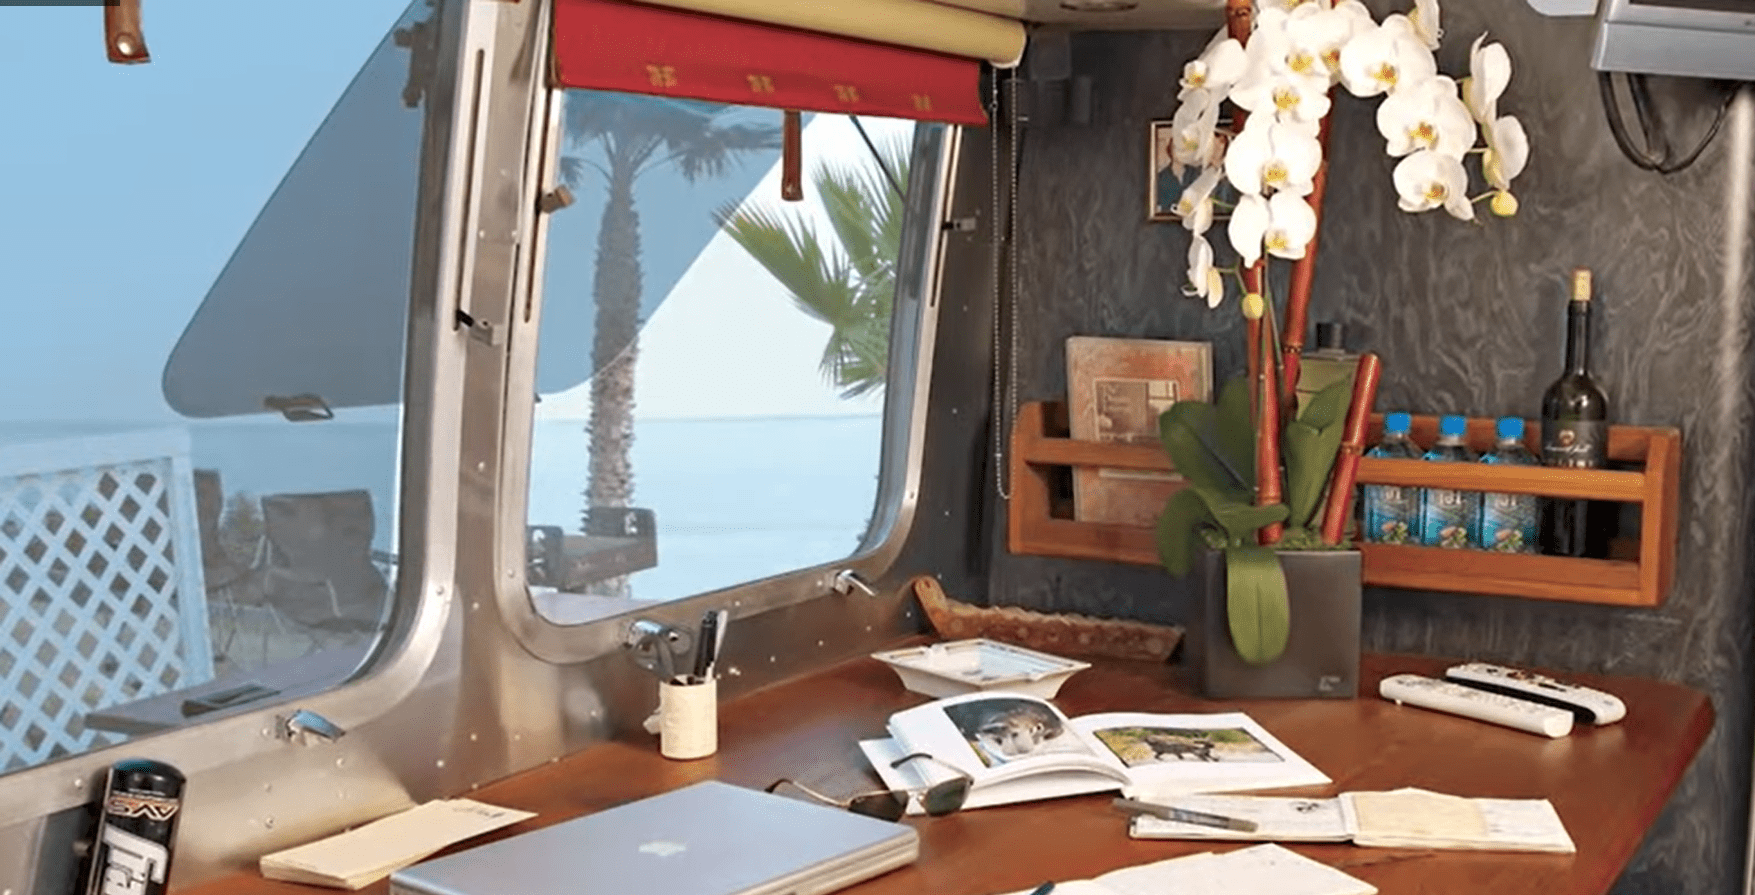 A desk and windows inside an Airstream trailer. | Source: youtube.com/Famous Entertainment